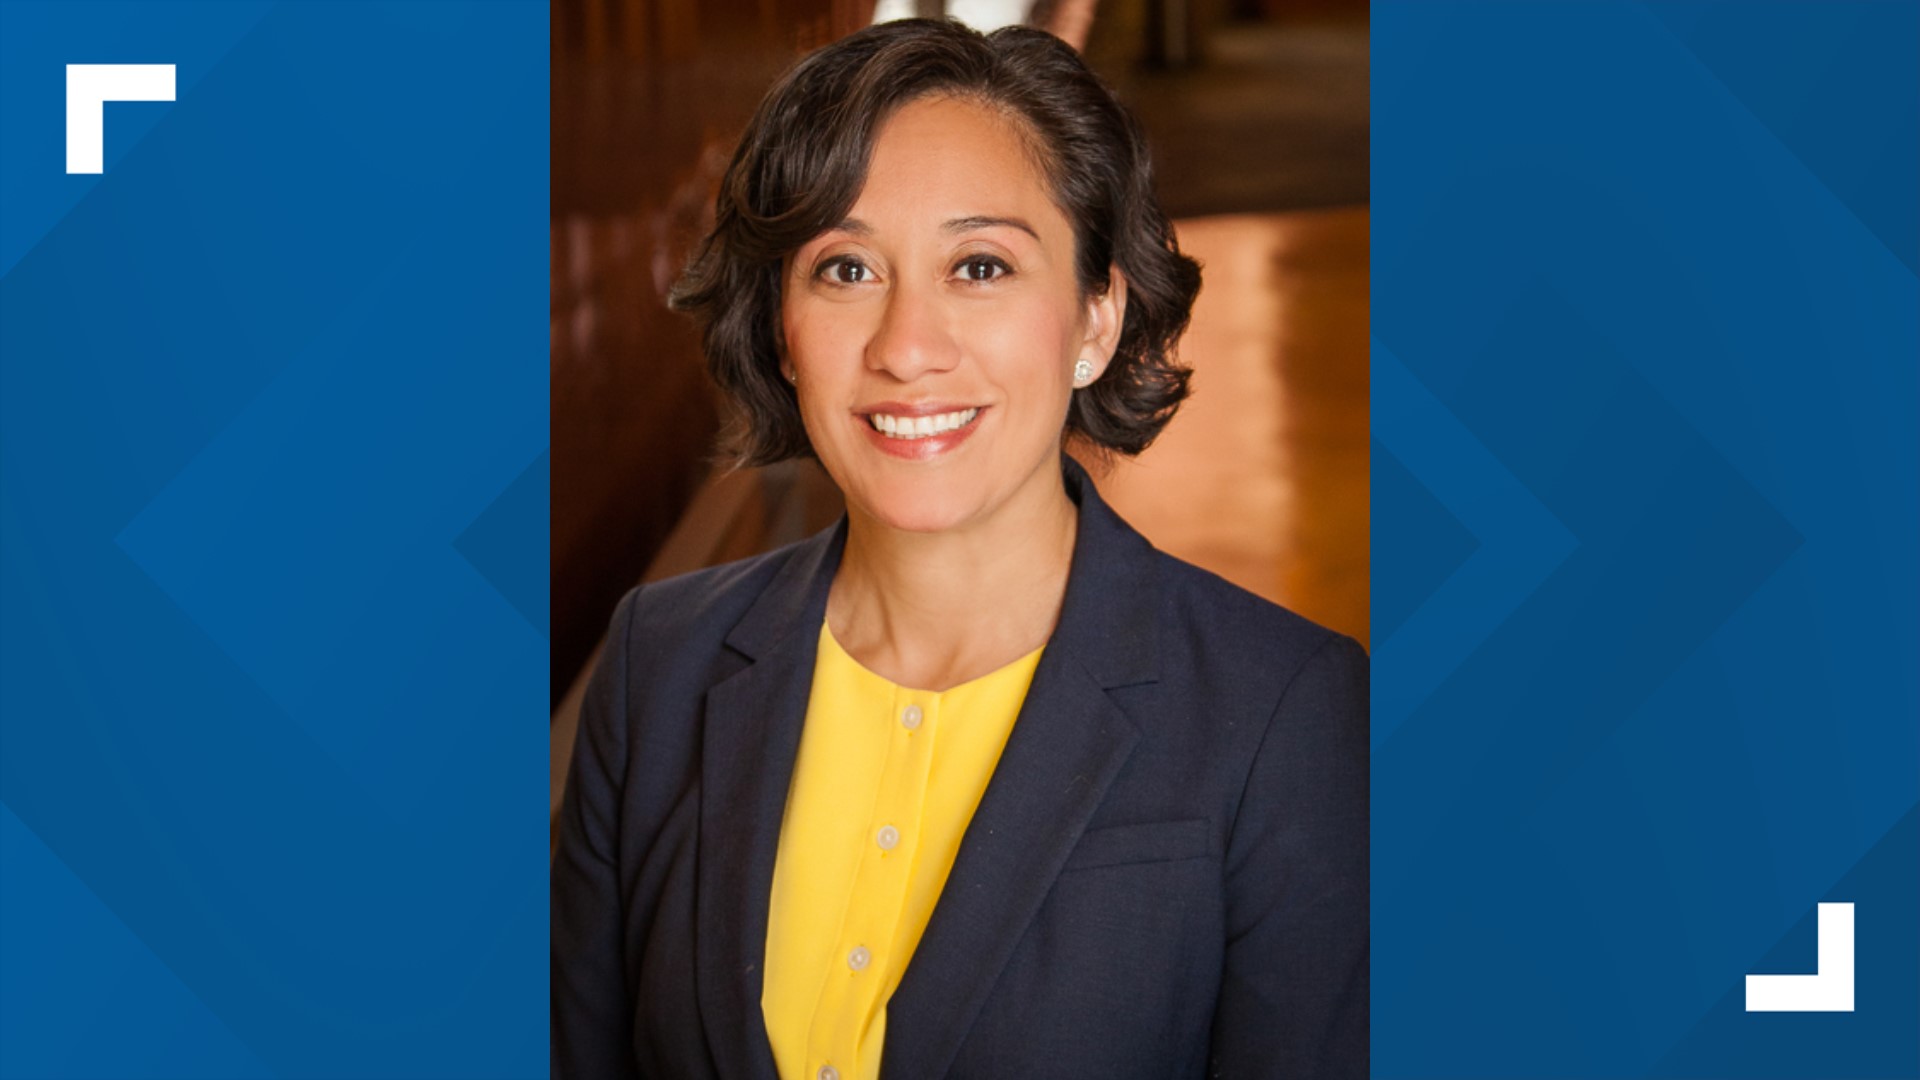 Garza, Austin's first Latina mayor pro tem and council member, was first elected to represent District 2 in 2014.